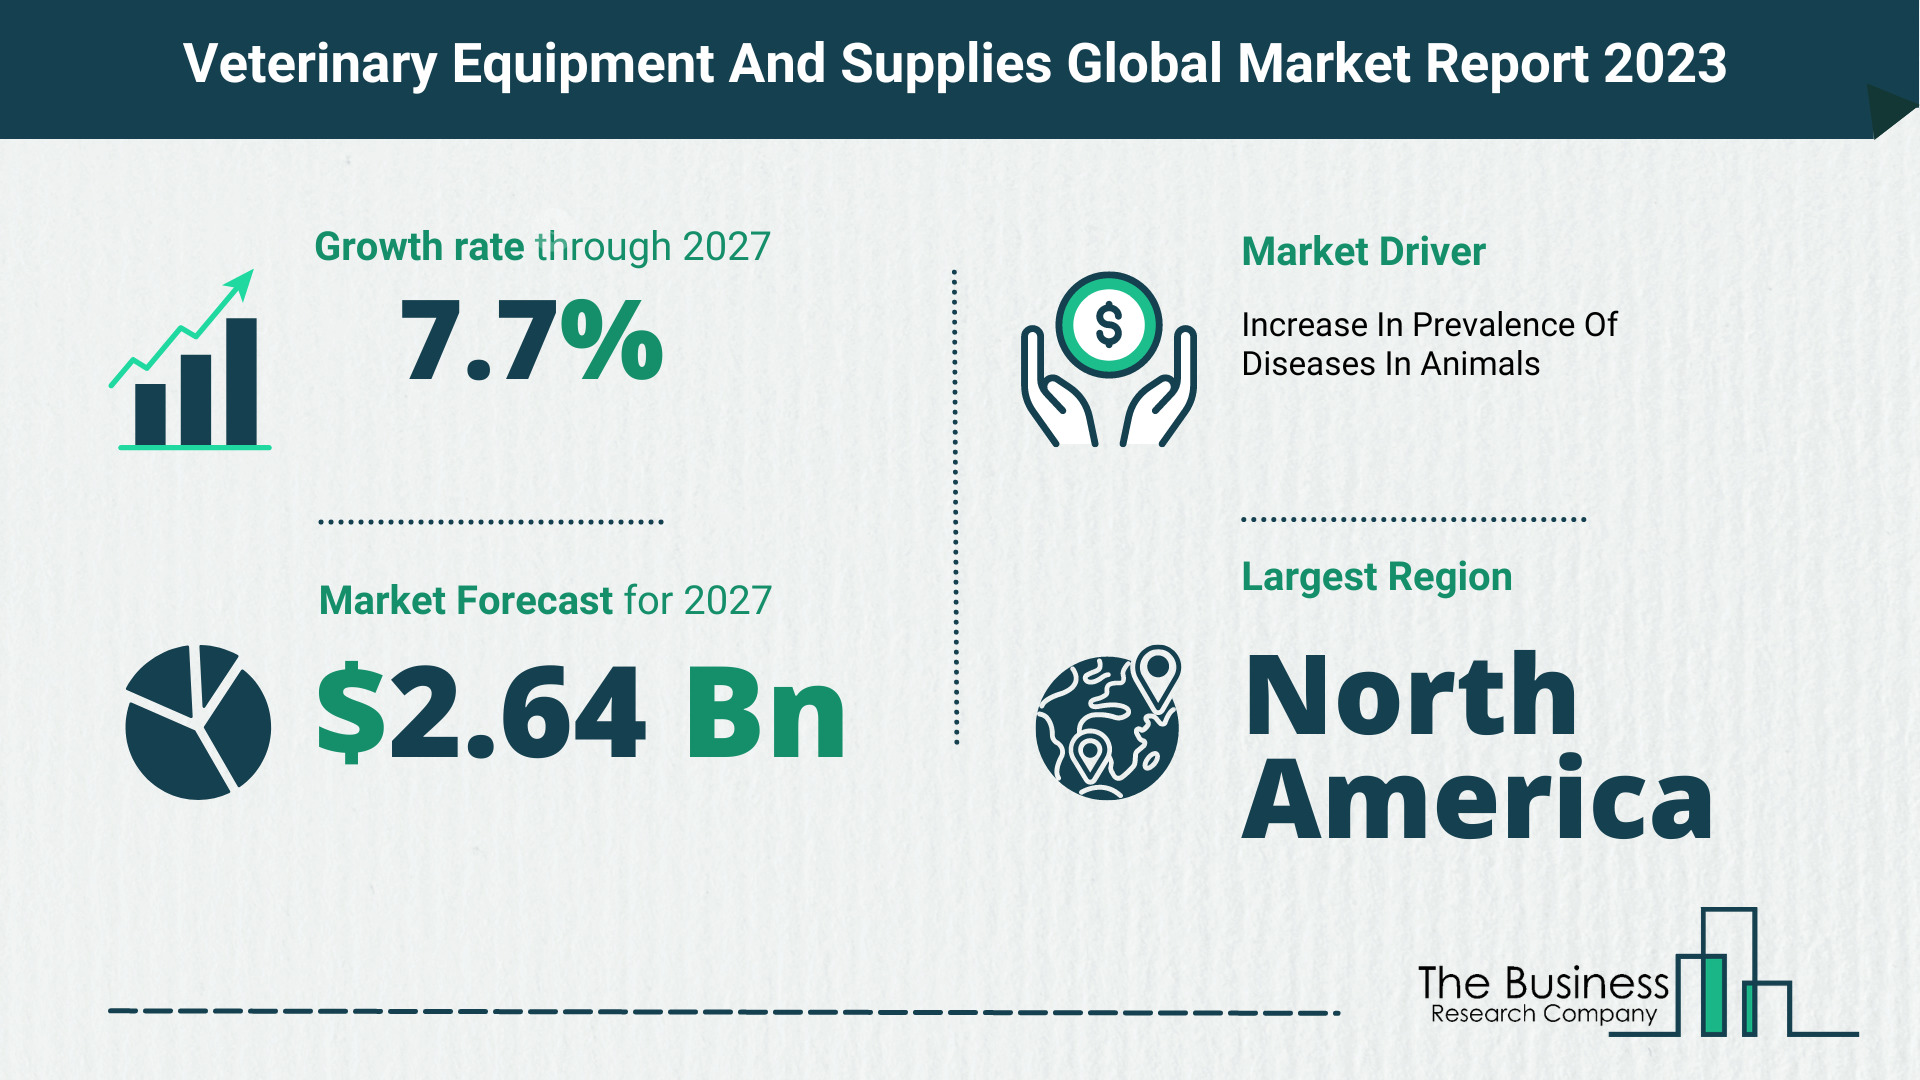 Global Veterinary Equipment And Supplies Market Opportunities And Strategies 2023